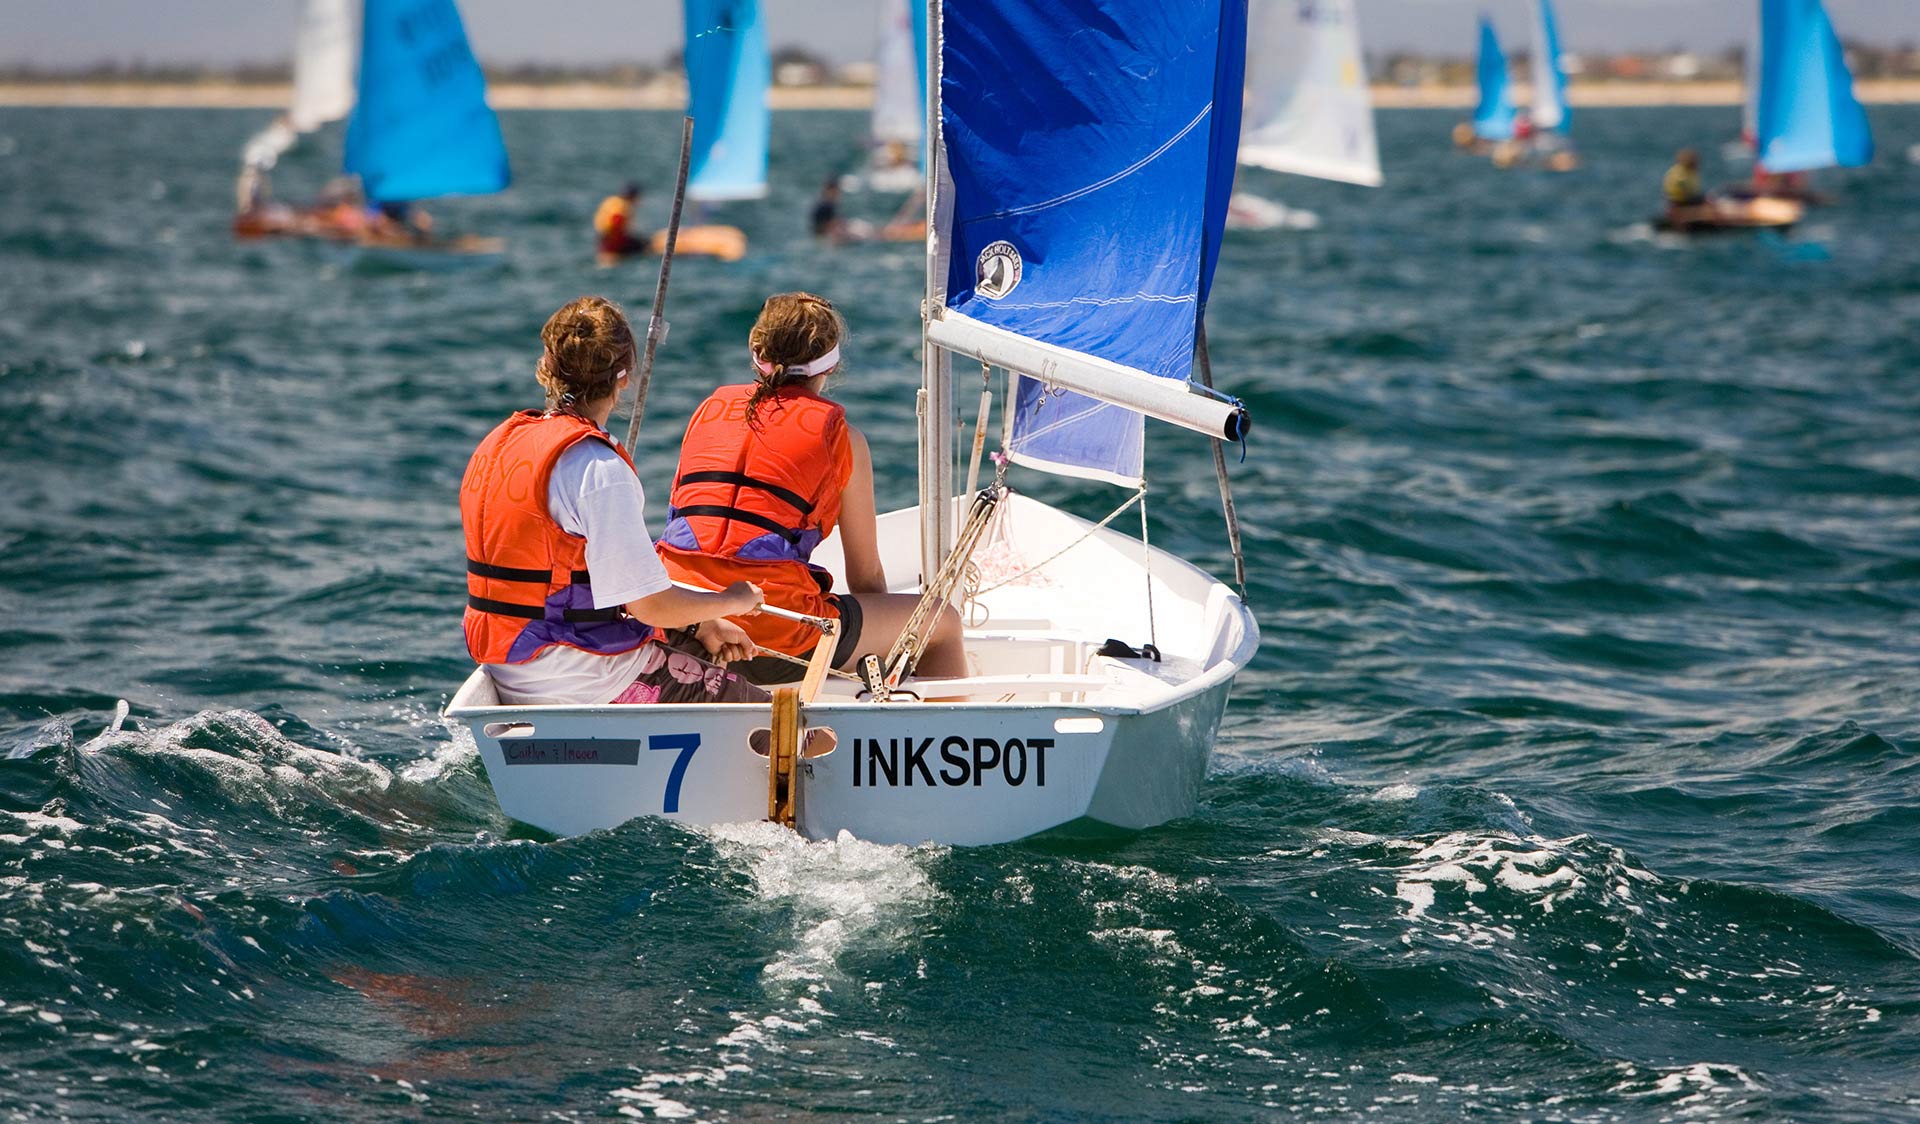 Two teenage girls take part in a sailing race on Port Philip Bay in a small boat called Inkspot. 